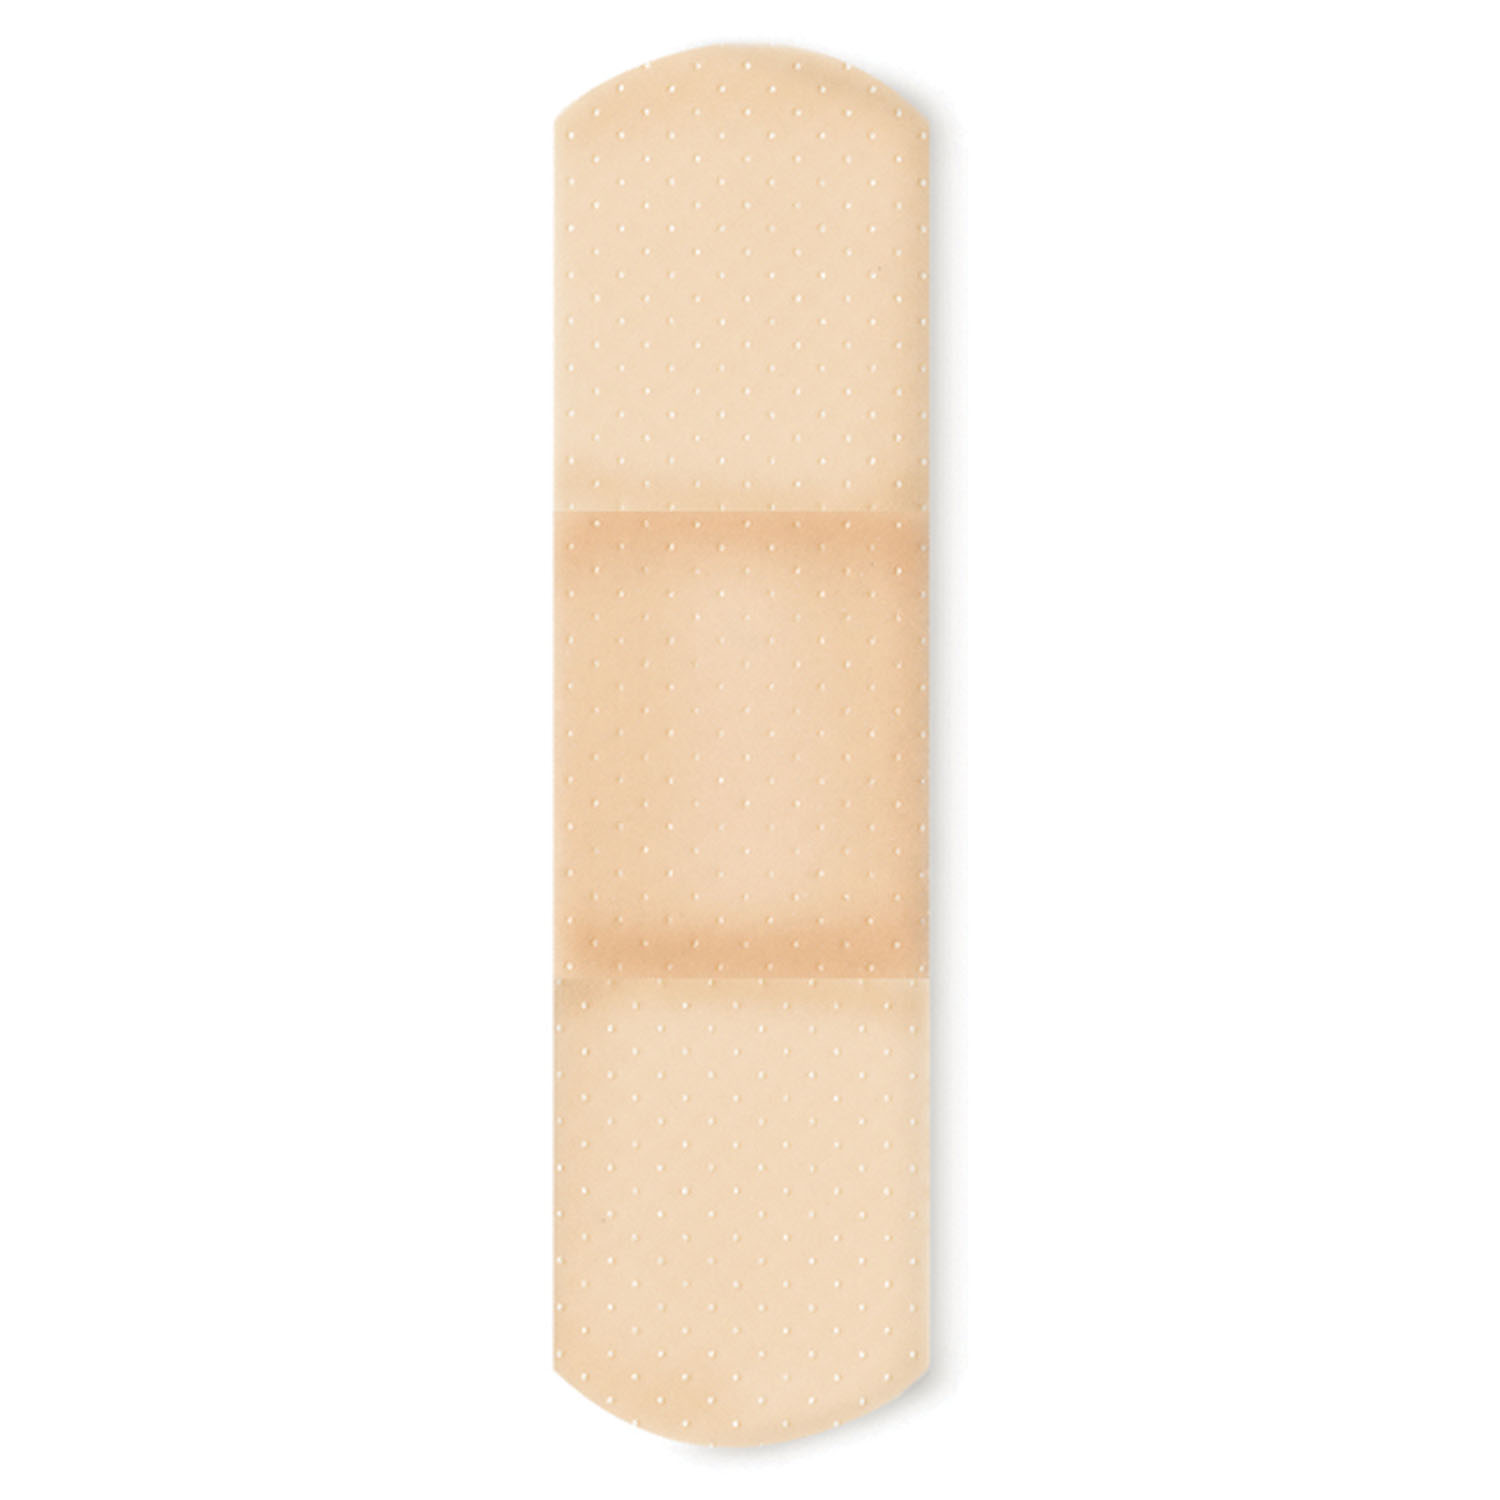 DUKAL FIRST AID SHEER ADHESIVE BANDAGES : 1275033 BX $3.07 Stocked